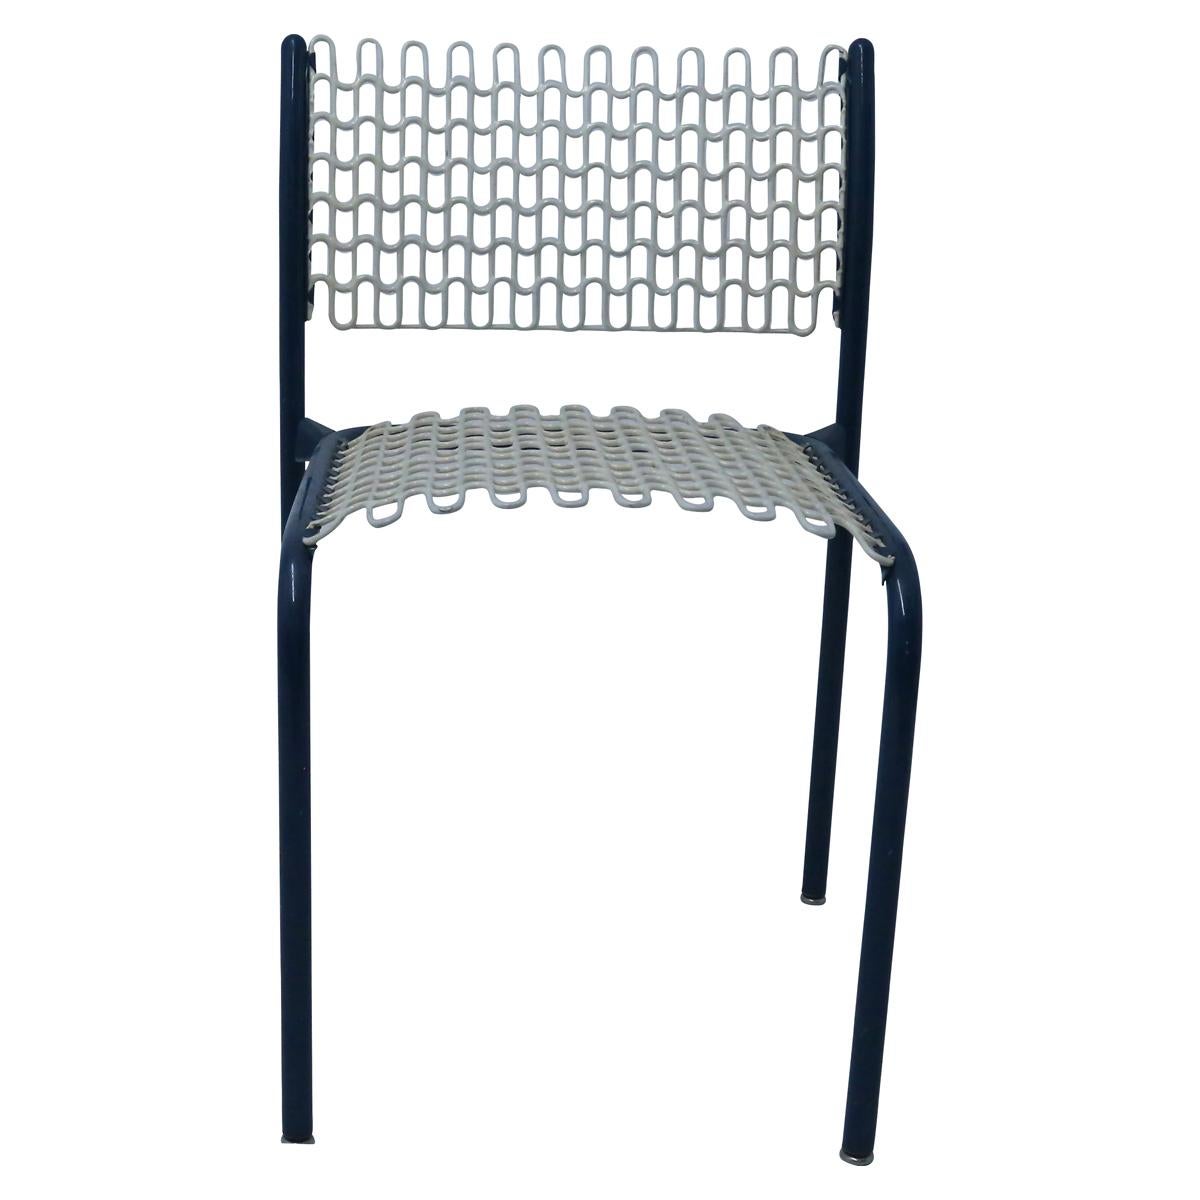 Set of Four Modernist Indoor/Outdoor Chairs with Mesh Seats and Backs In Excellent Condition For Sale In New York, NY